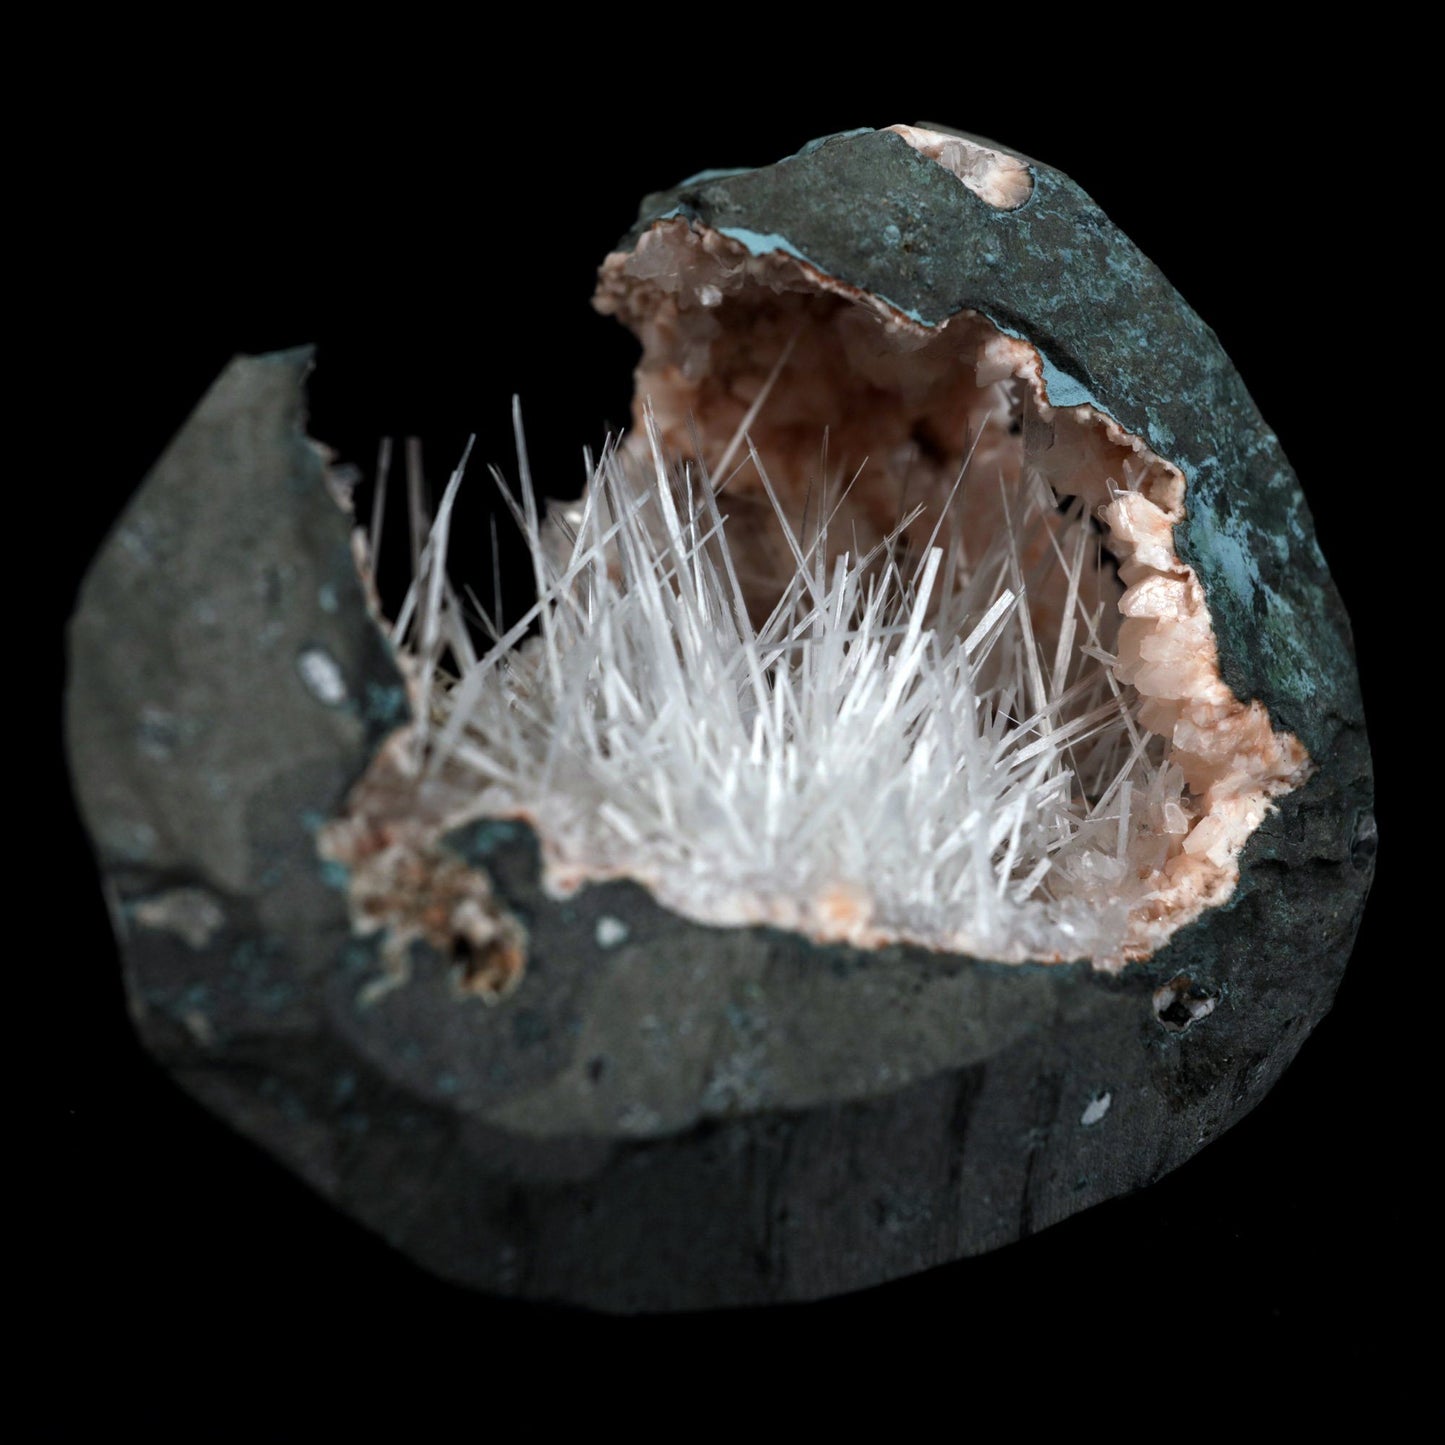 Scolecite Sprays Inside Heulandite See through Geode Natural Mineral S…  https://www.superbminerals.us/products/scolecite-sprays-inside-heulandite-see-through-geode-natural-mineral-specimen-b-4906  Features: A huge Geode with beige Heulandite crystals and a conspicuous radial spray of glossy, colourless, extremely transparent, acicular (needle-like) Scolecite crystals throughout, as well as numerous solitary Scolecite crystals. Simply breathtaking - the crystal structure, lustre, contrast, and symmetry 